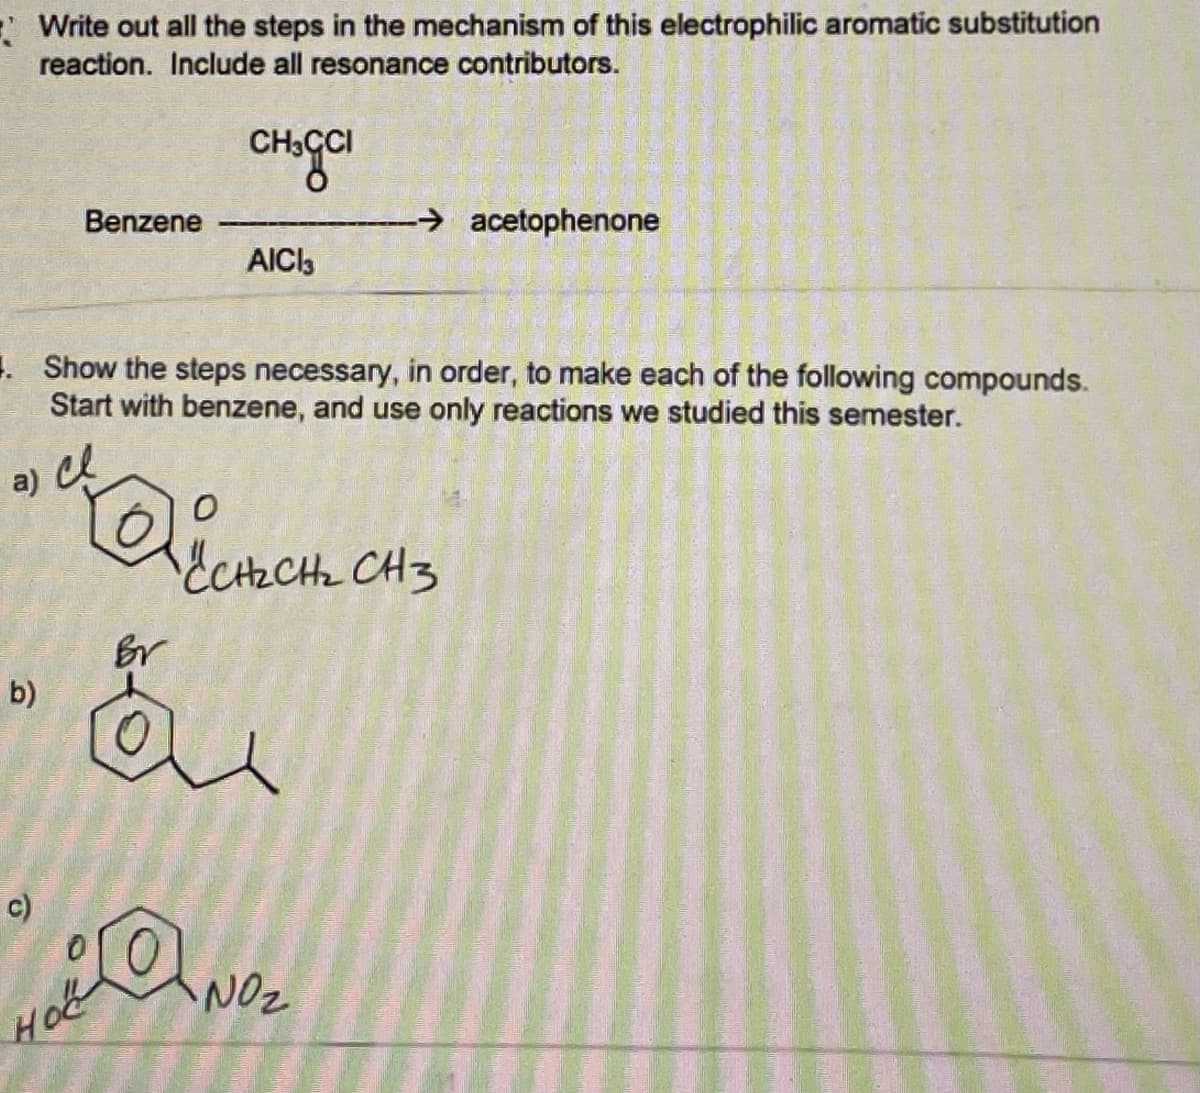 E Write out all the steps in the mechanism of this electrophilic aromatic substitution
reaction. Include all resonance contributors.
CH3CI
Benzene
→ acetophenone
AICI3
. Show the steps necessary, in order, to make each of the following compounds.
Start with benzene, and use only reactions we studied this semester.
ECHECH CH3
b)
c)
NOz
